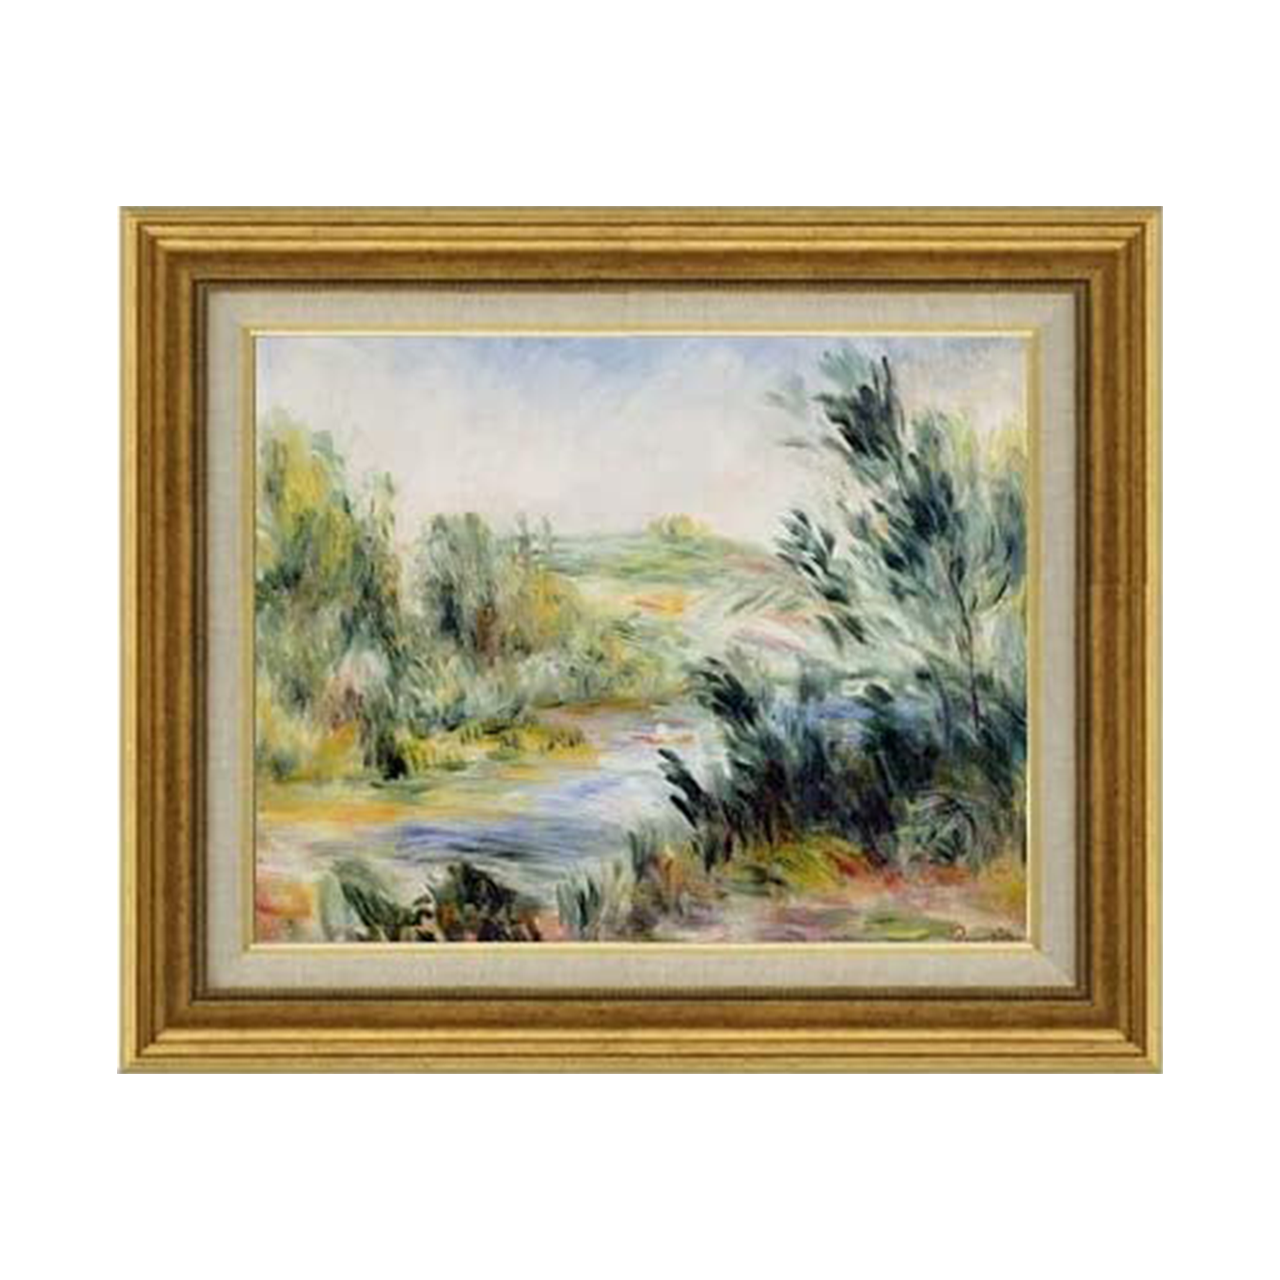 Pierre-auguste renoir | The Banks of a River, Rower in a Boat F6　 - Commo Art 風景画 　